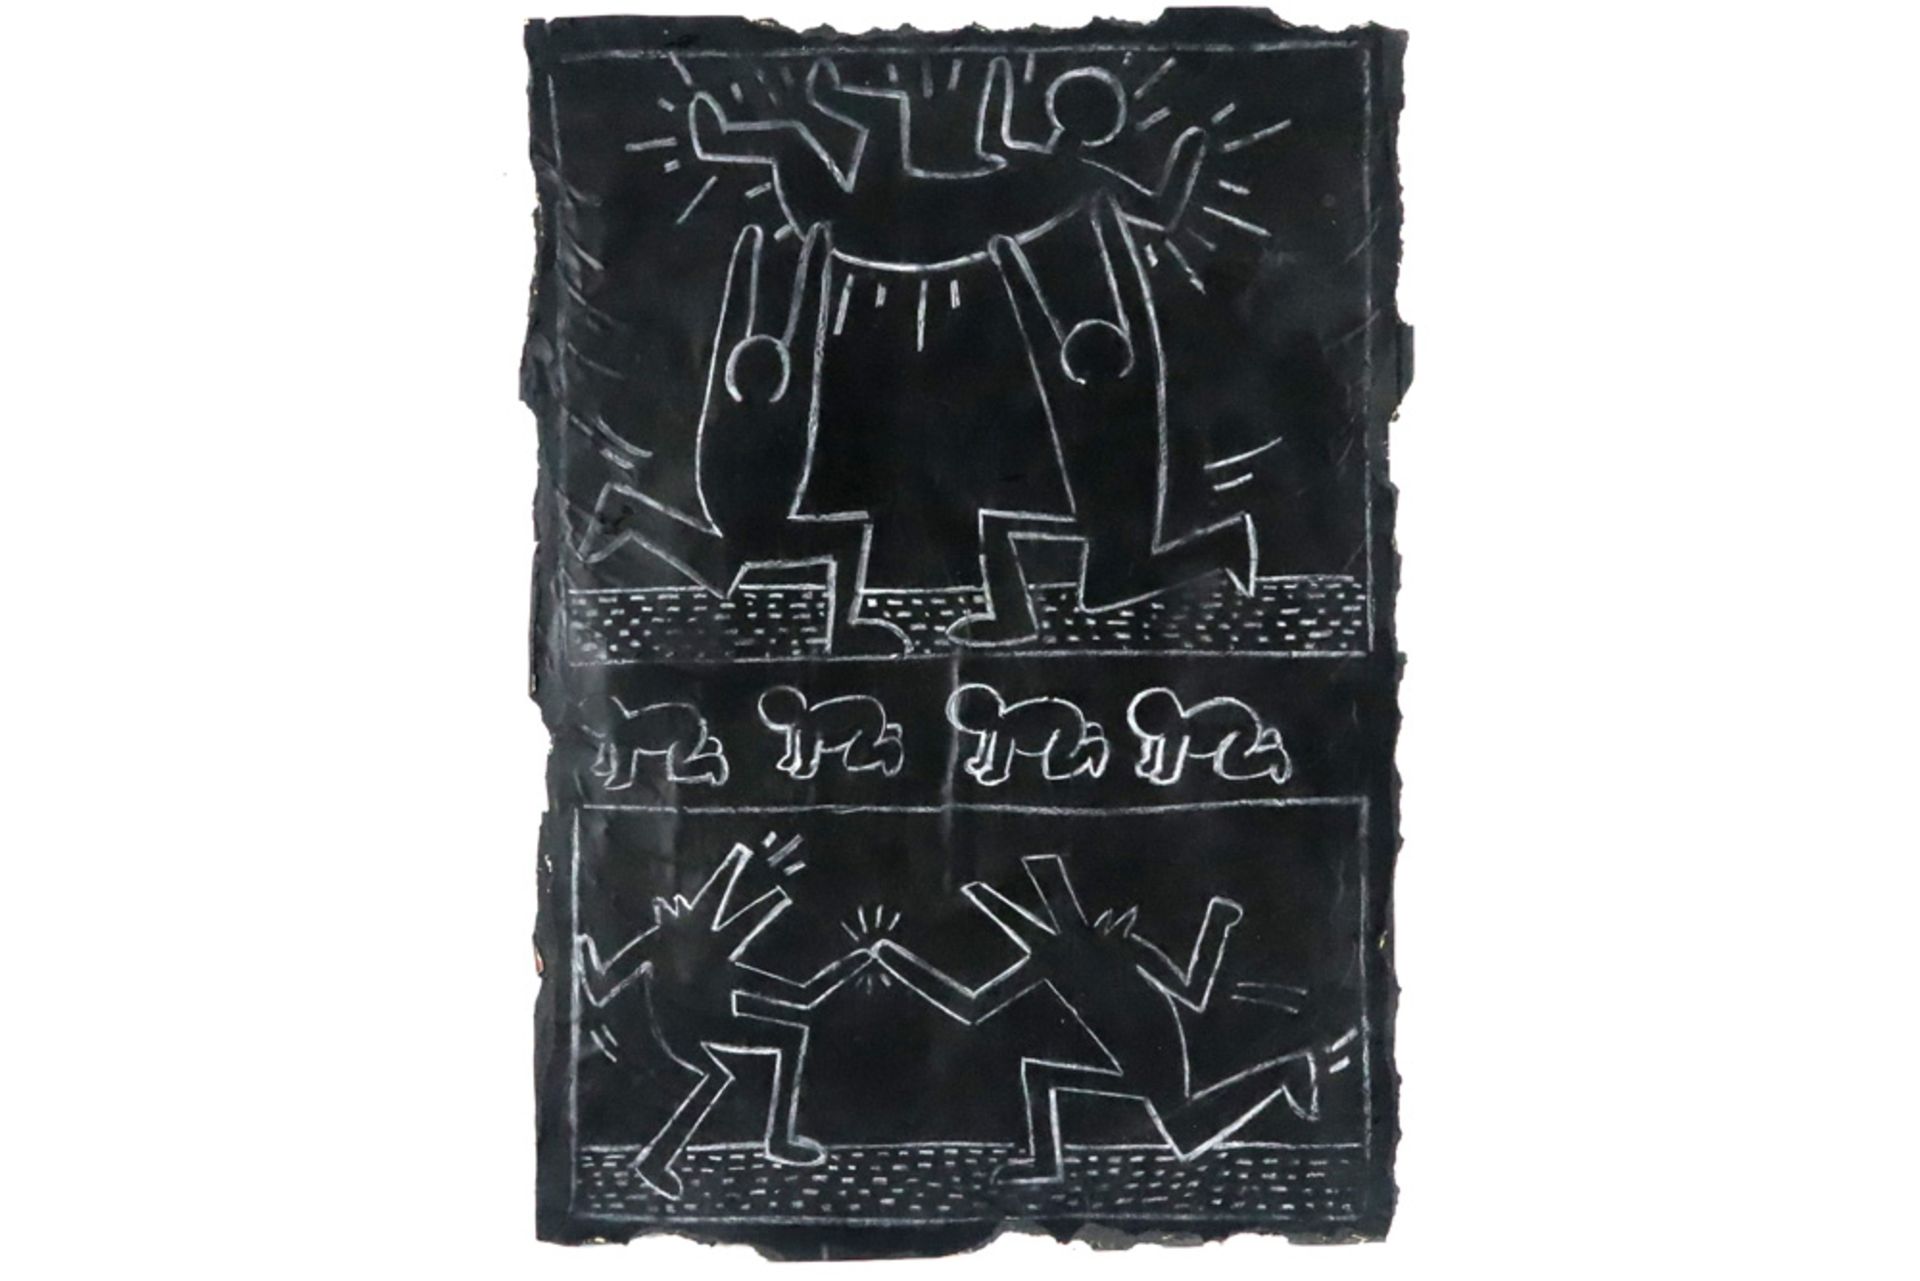 original Keith Haring "Subway" drawing with five typical 'Haring' figures || HARING KEITH (1958 -